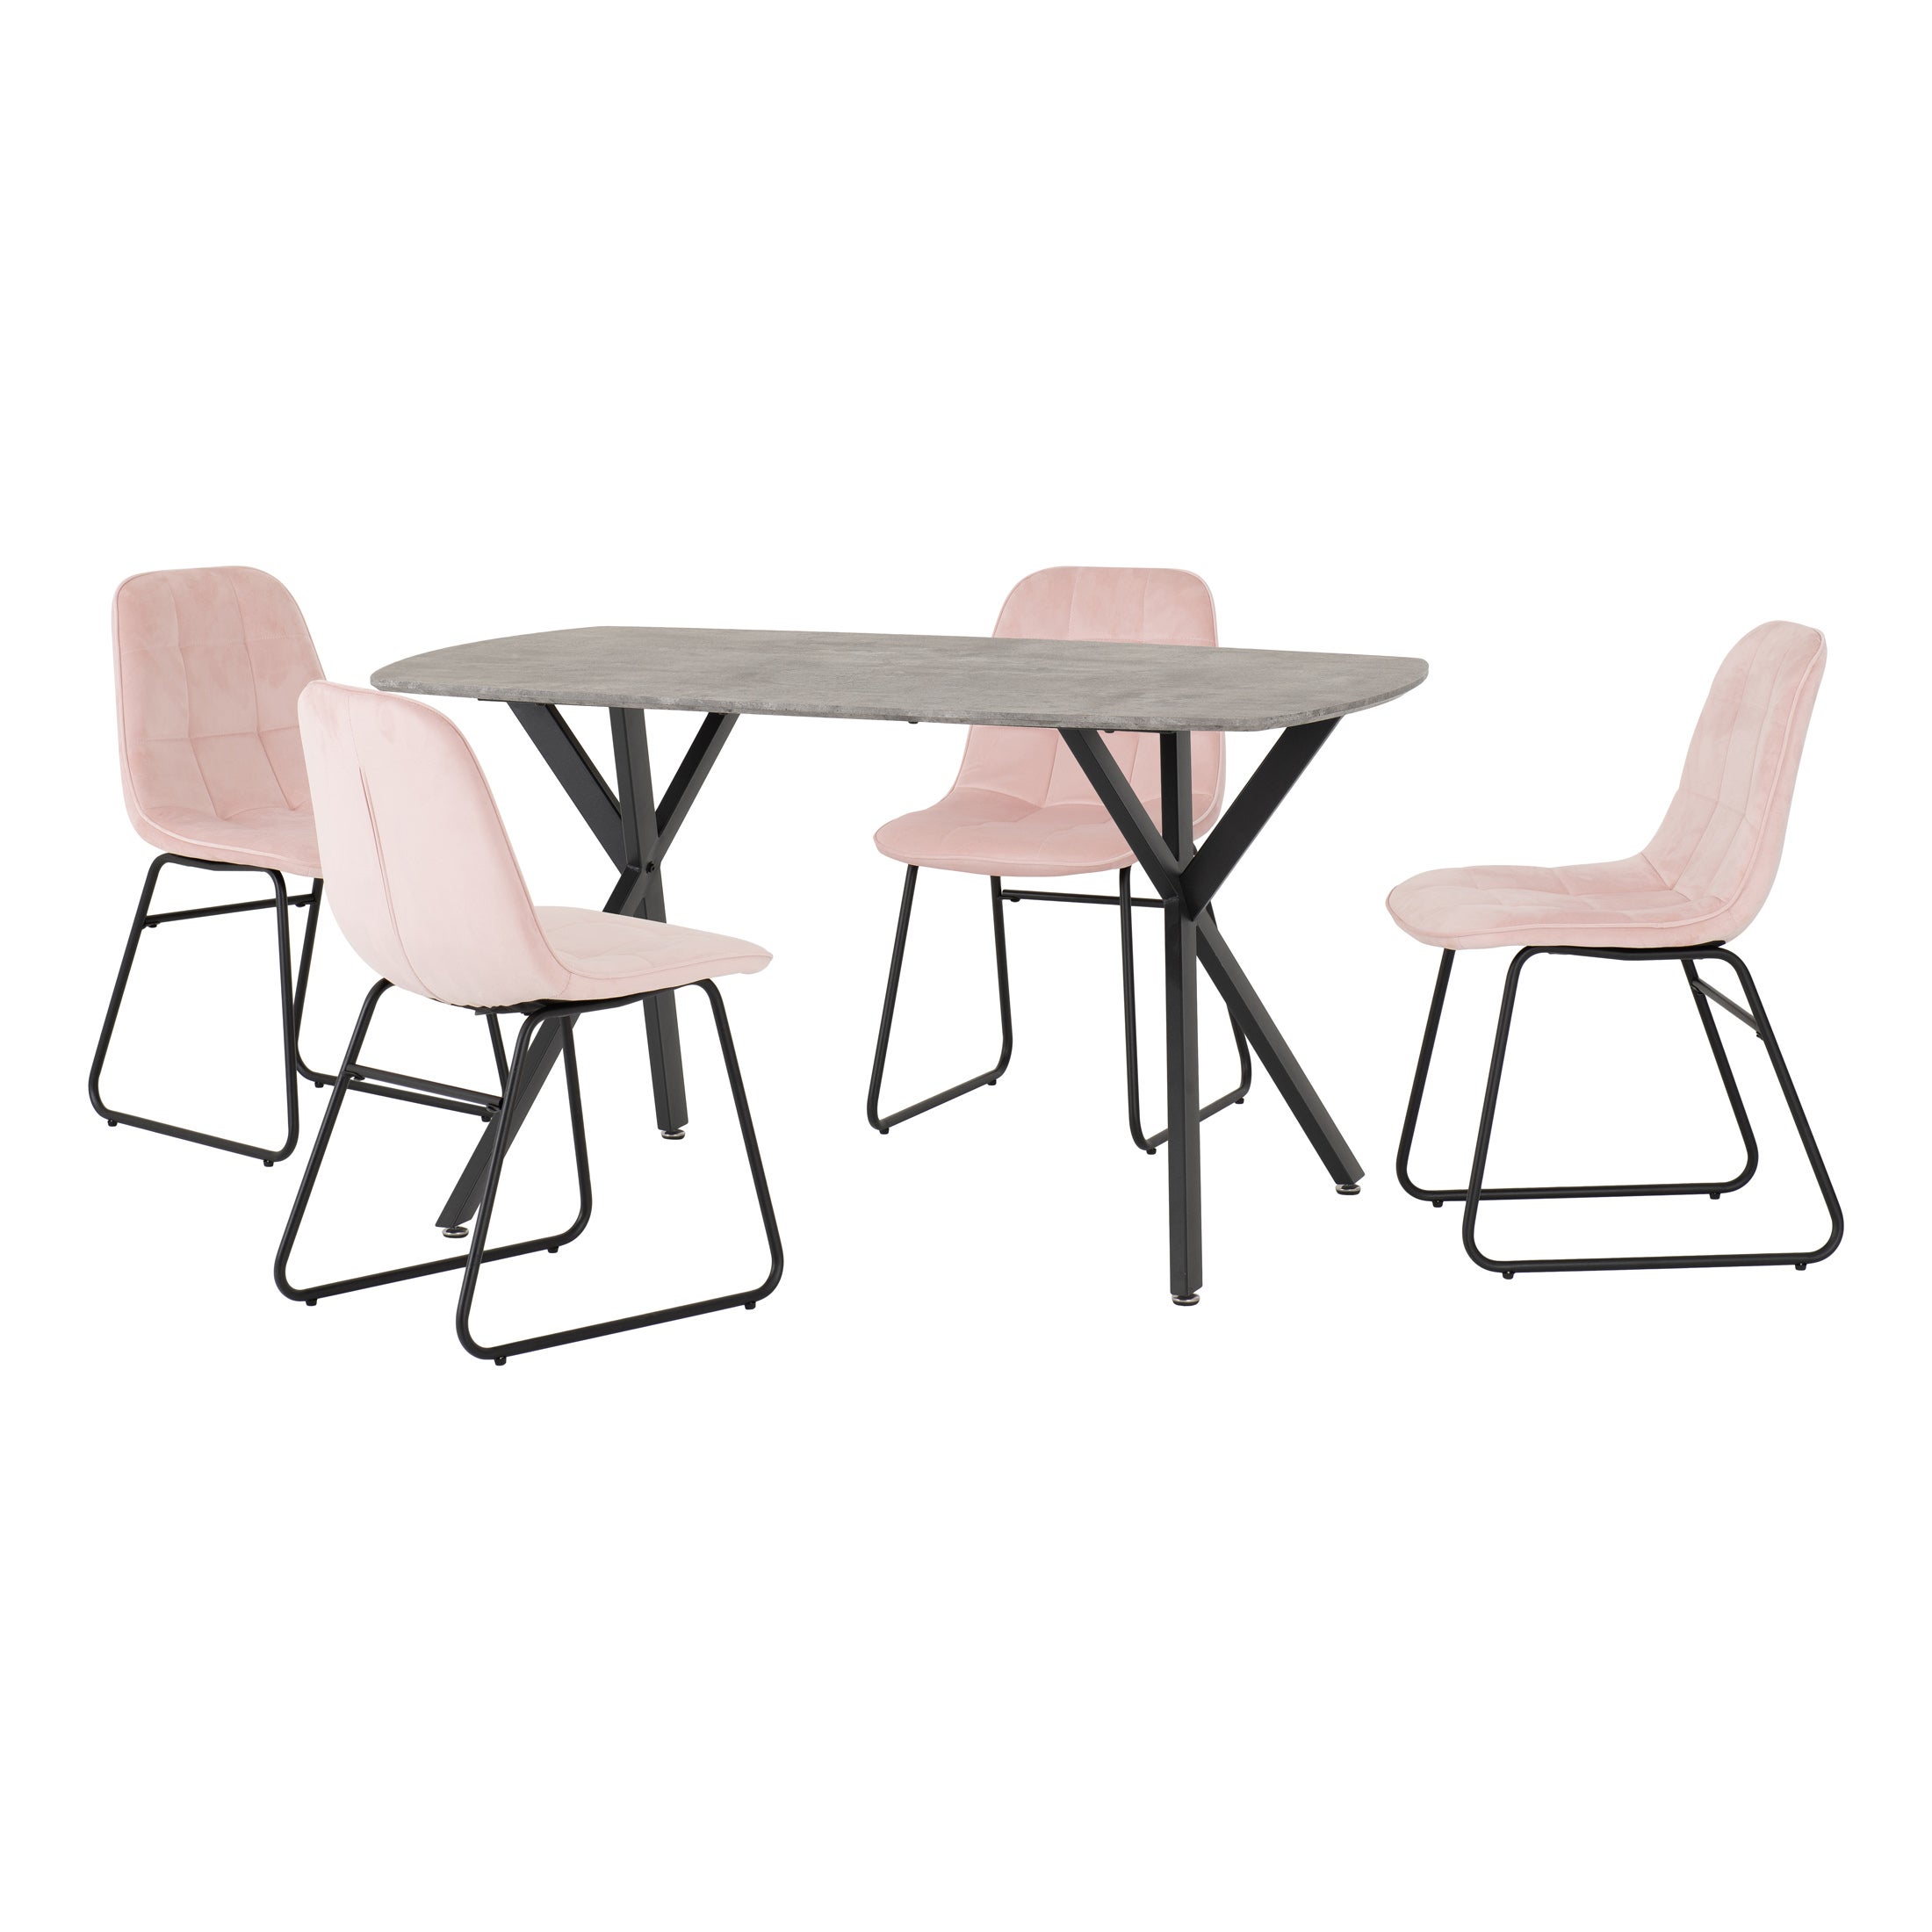 Athens Rectangular Dining Table With 4 Lukas Chairs Concrete Effect Pink